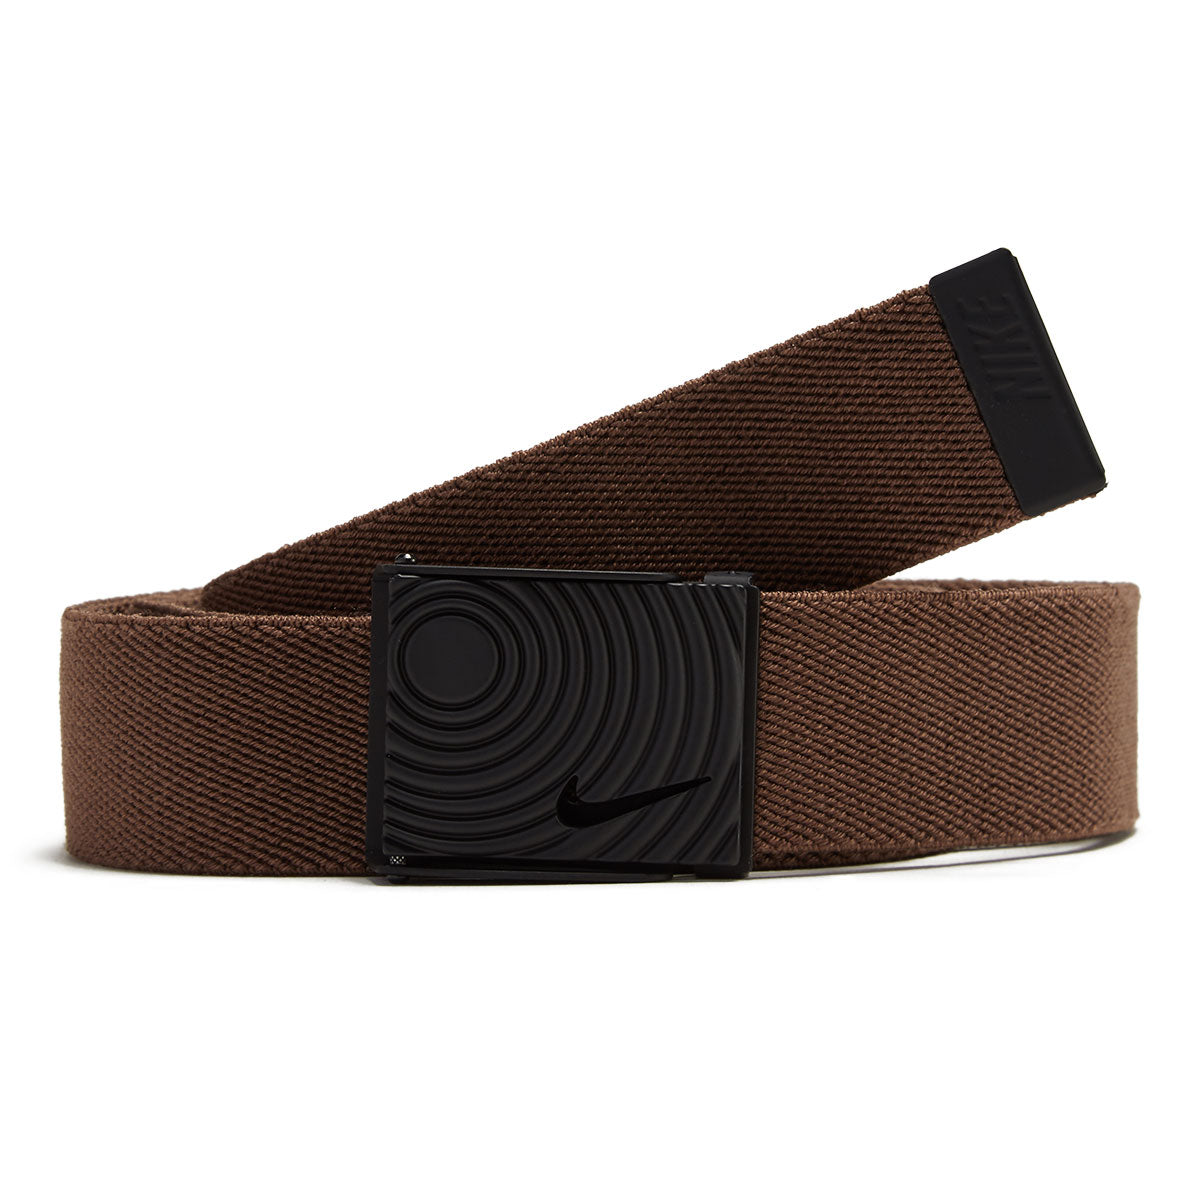 Nike Outsole Stretch Web Belt - Brown image 1